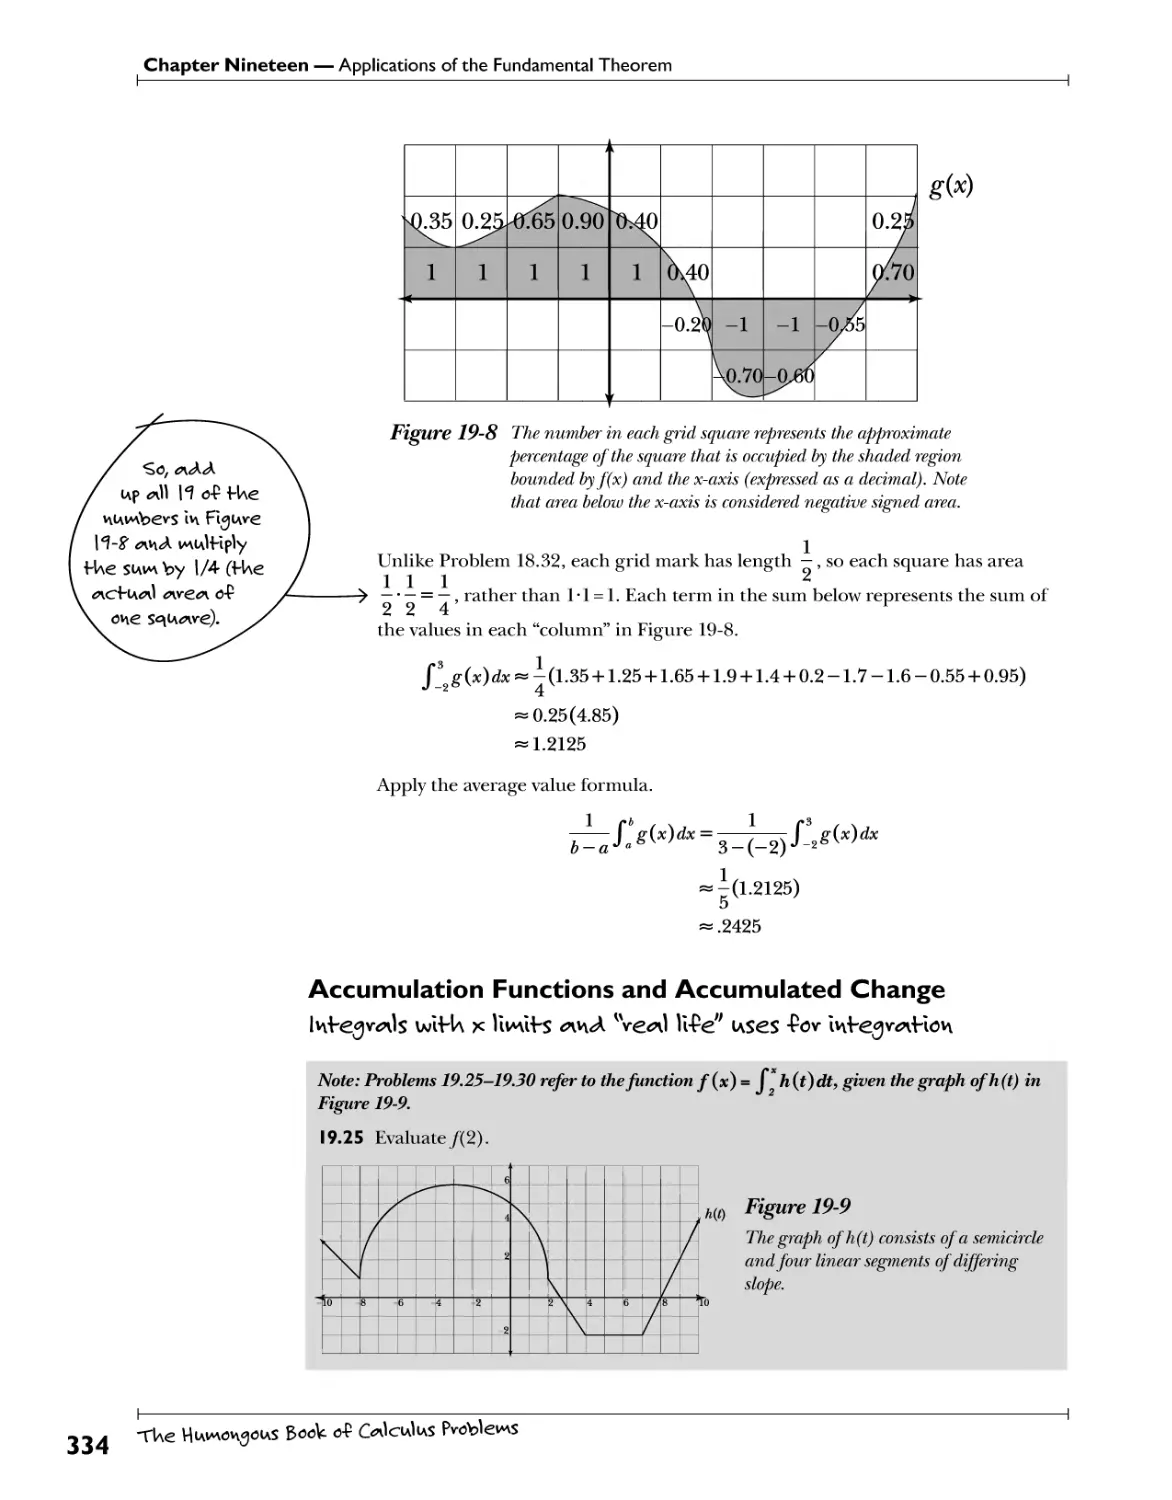 Accumulation Functions and Accumulated Change 334